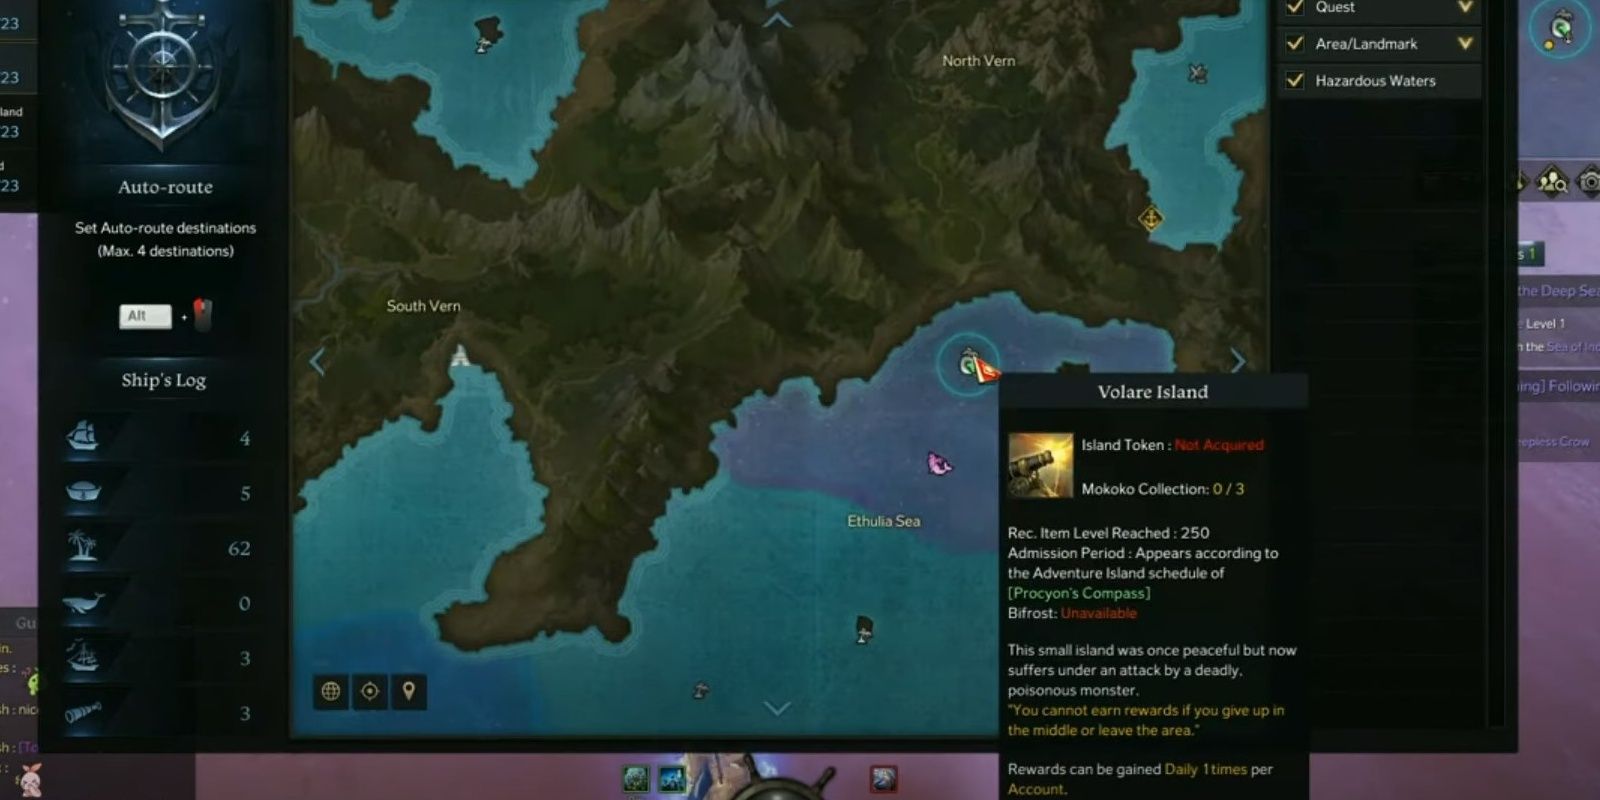 The Lost Ark character is showing the location of the Volare Island on the map.